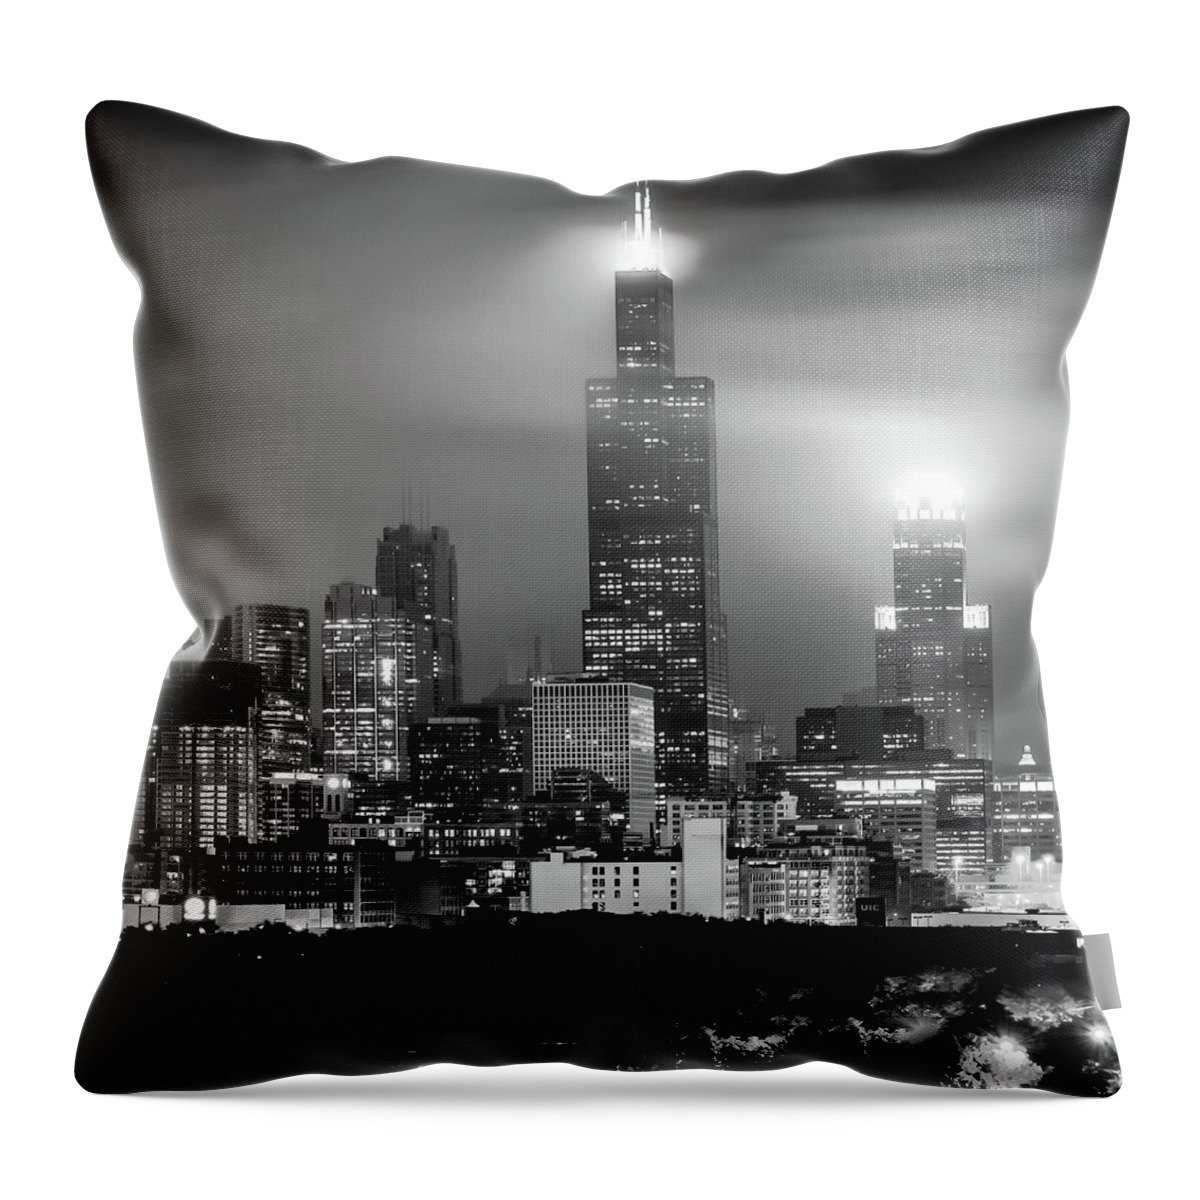 Chicago Skyline Throw Pillow featuring the photograph Windy City Skyline in Black and White - Chicago Illinois 1x1 by Gregory Ballos